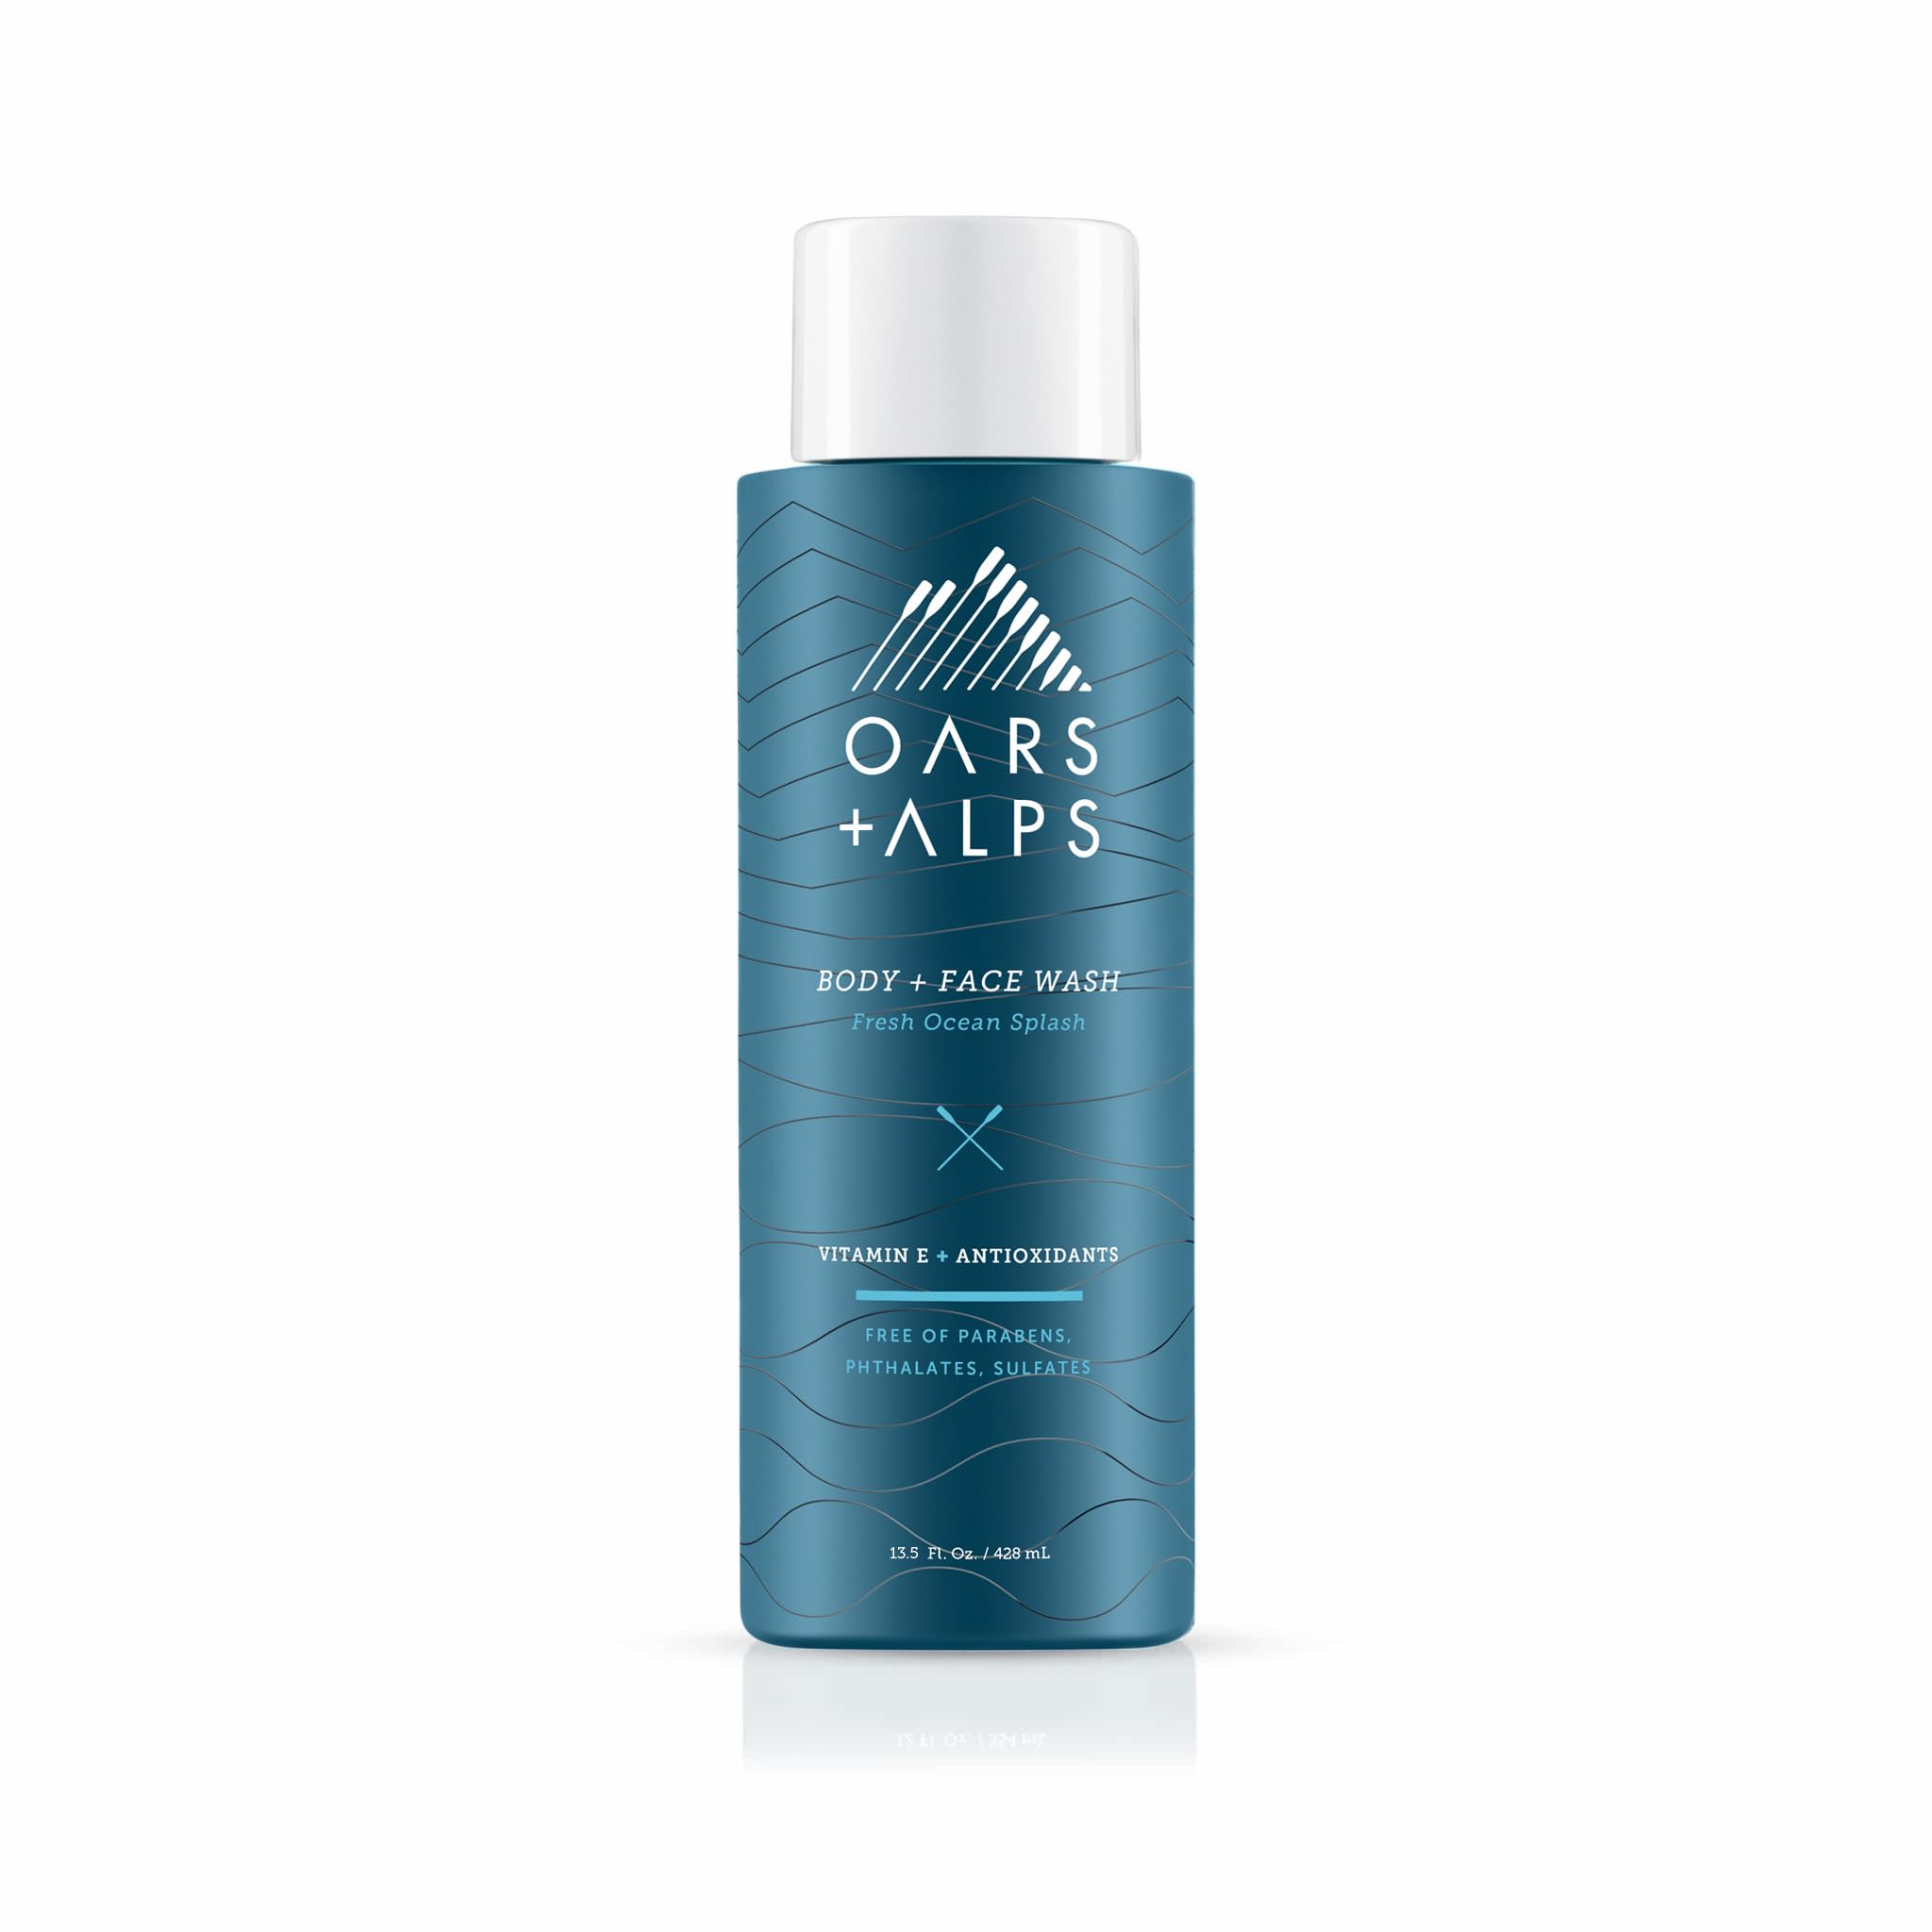 Oars + Alps Mens Moisturizing Body and Face Wash, Skin Care Infused with Vitamin E and Antioxidants, Sulfate Free, Fresh Ocean Splash, 13.5oz, 1 Pack